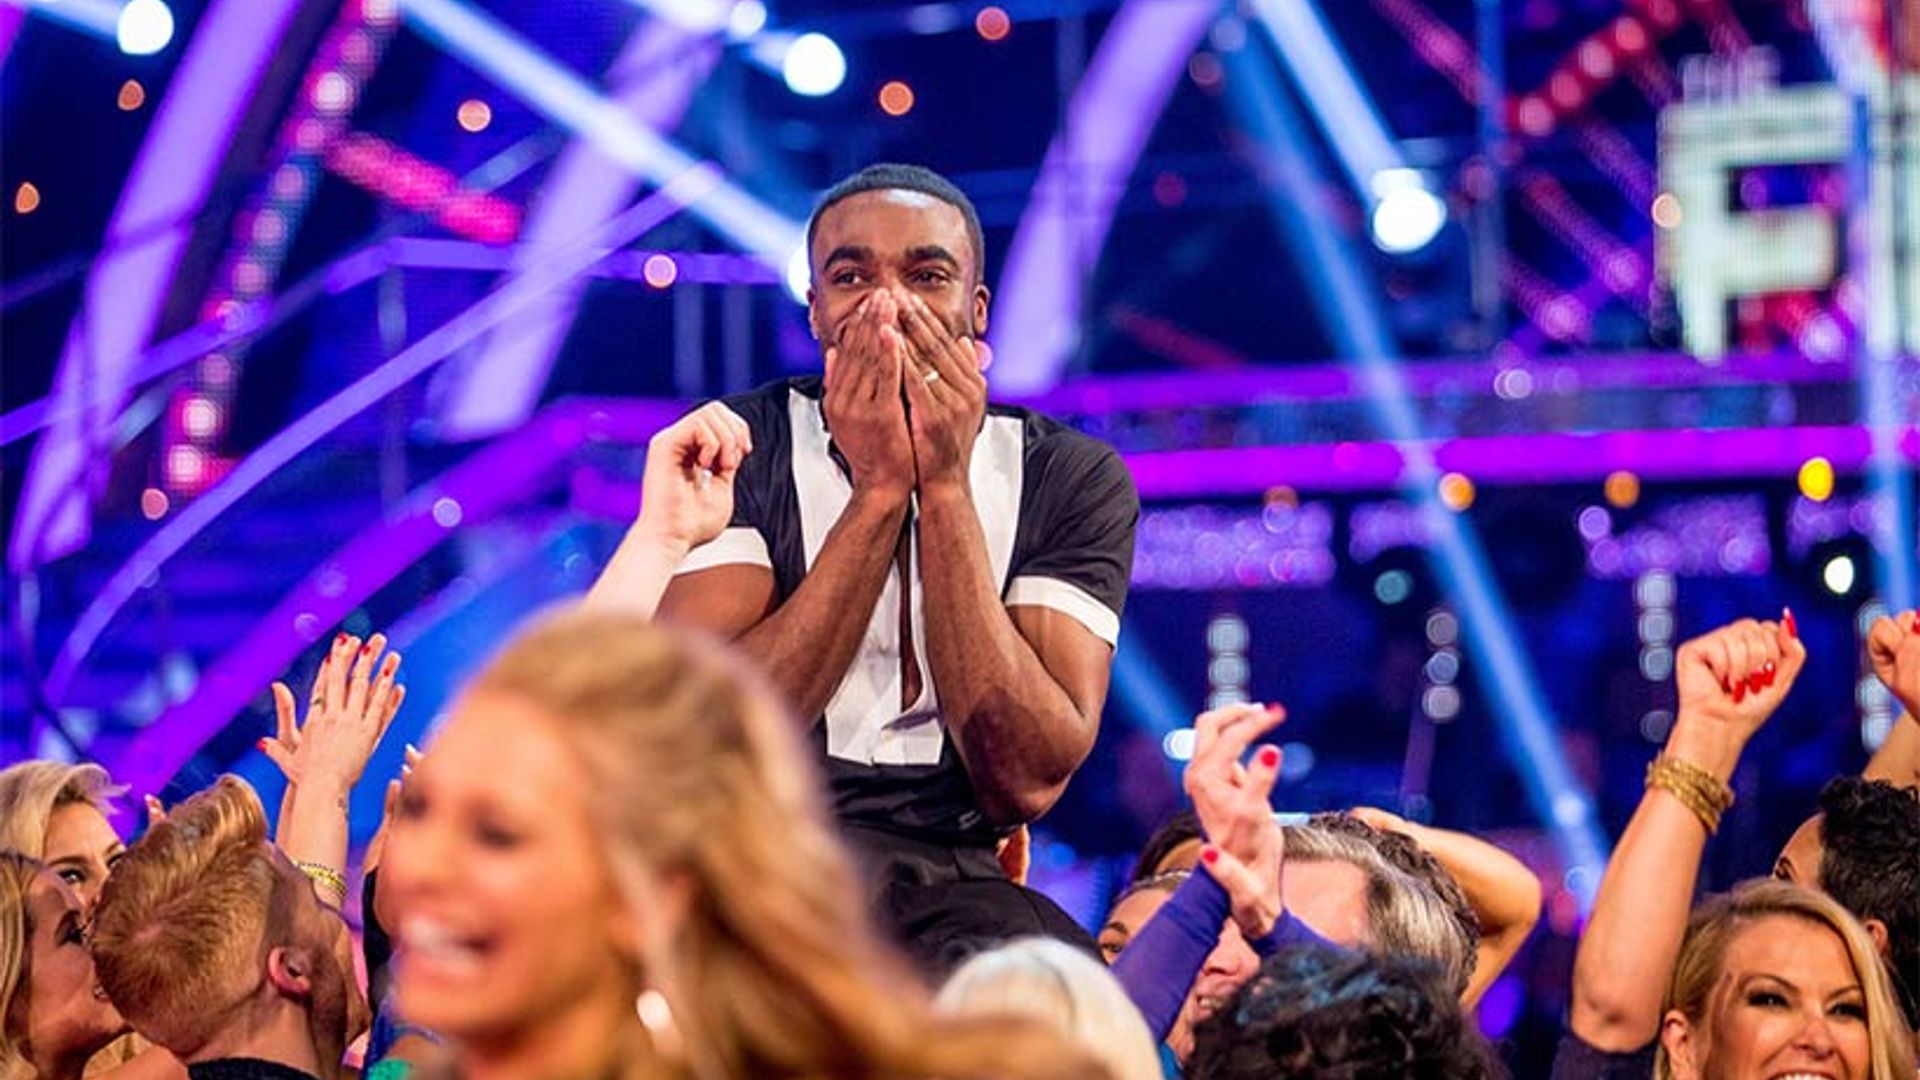 Ore Oduba wins Strictly Come Dancing: His high points and low points of the show